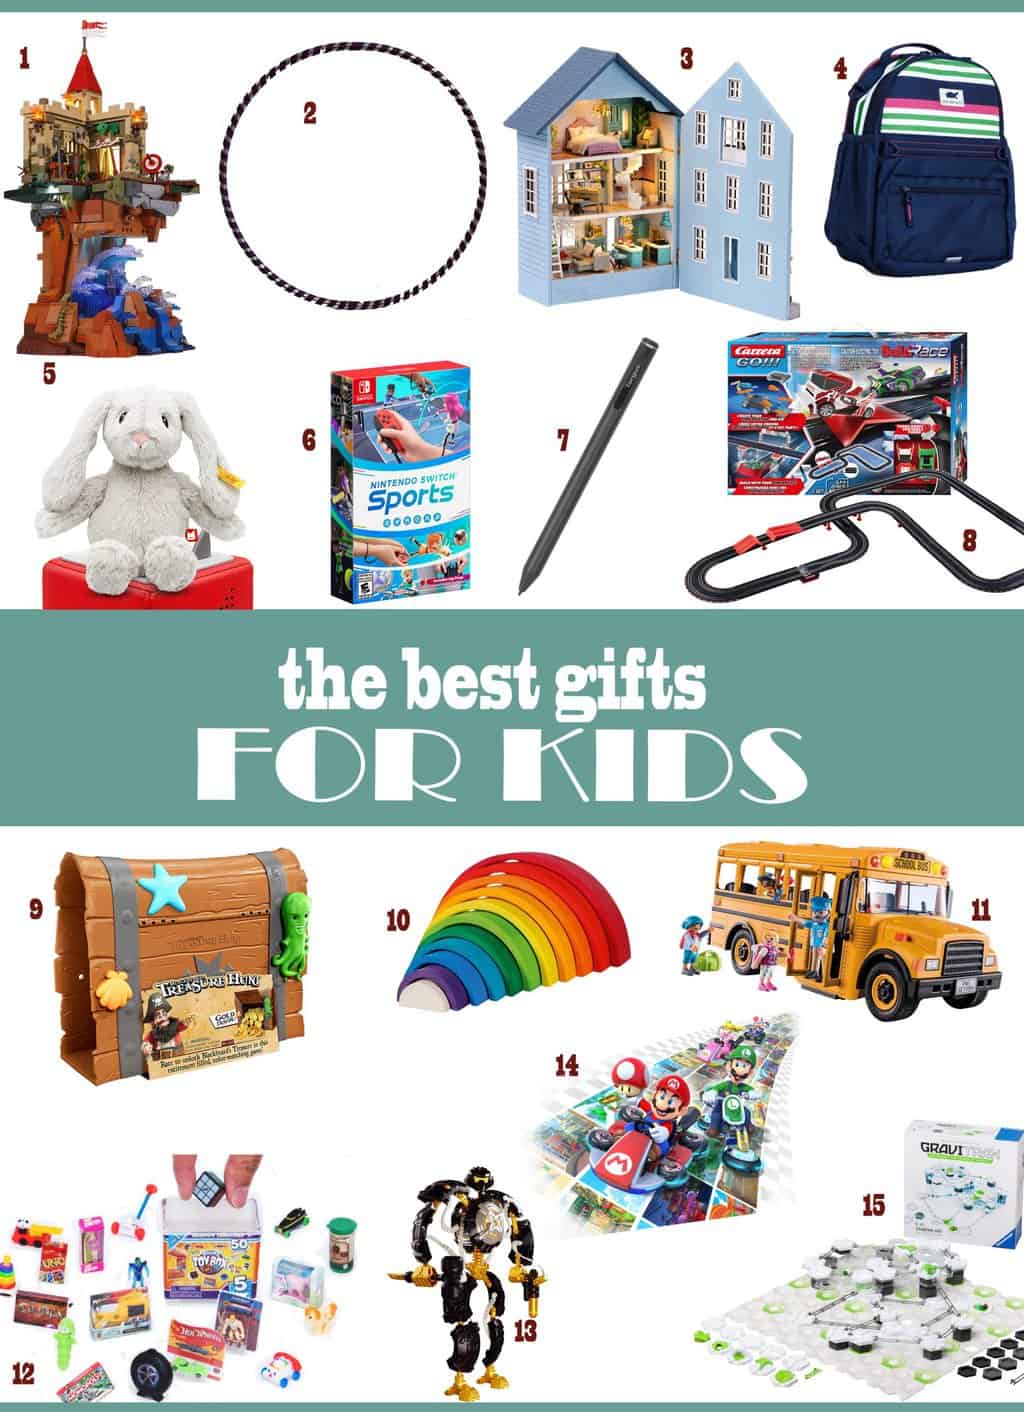 https://raveandreview.com/wp-content/uploads/2022/12/Kids-Holiday-Gift-Guide-1-scaled.jpg